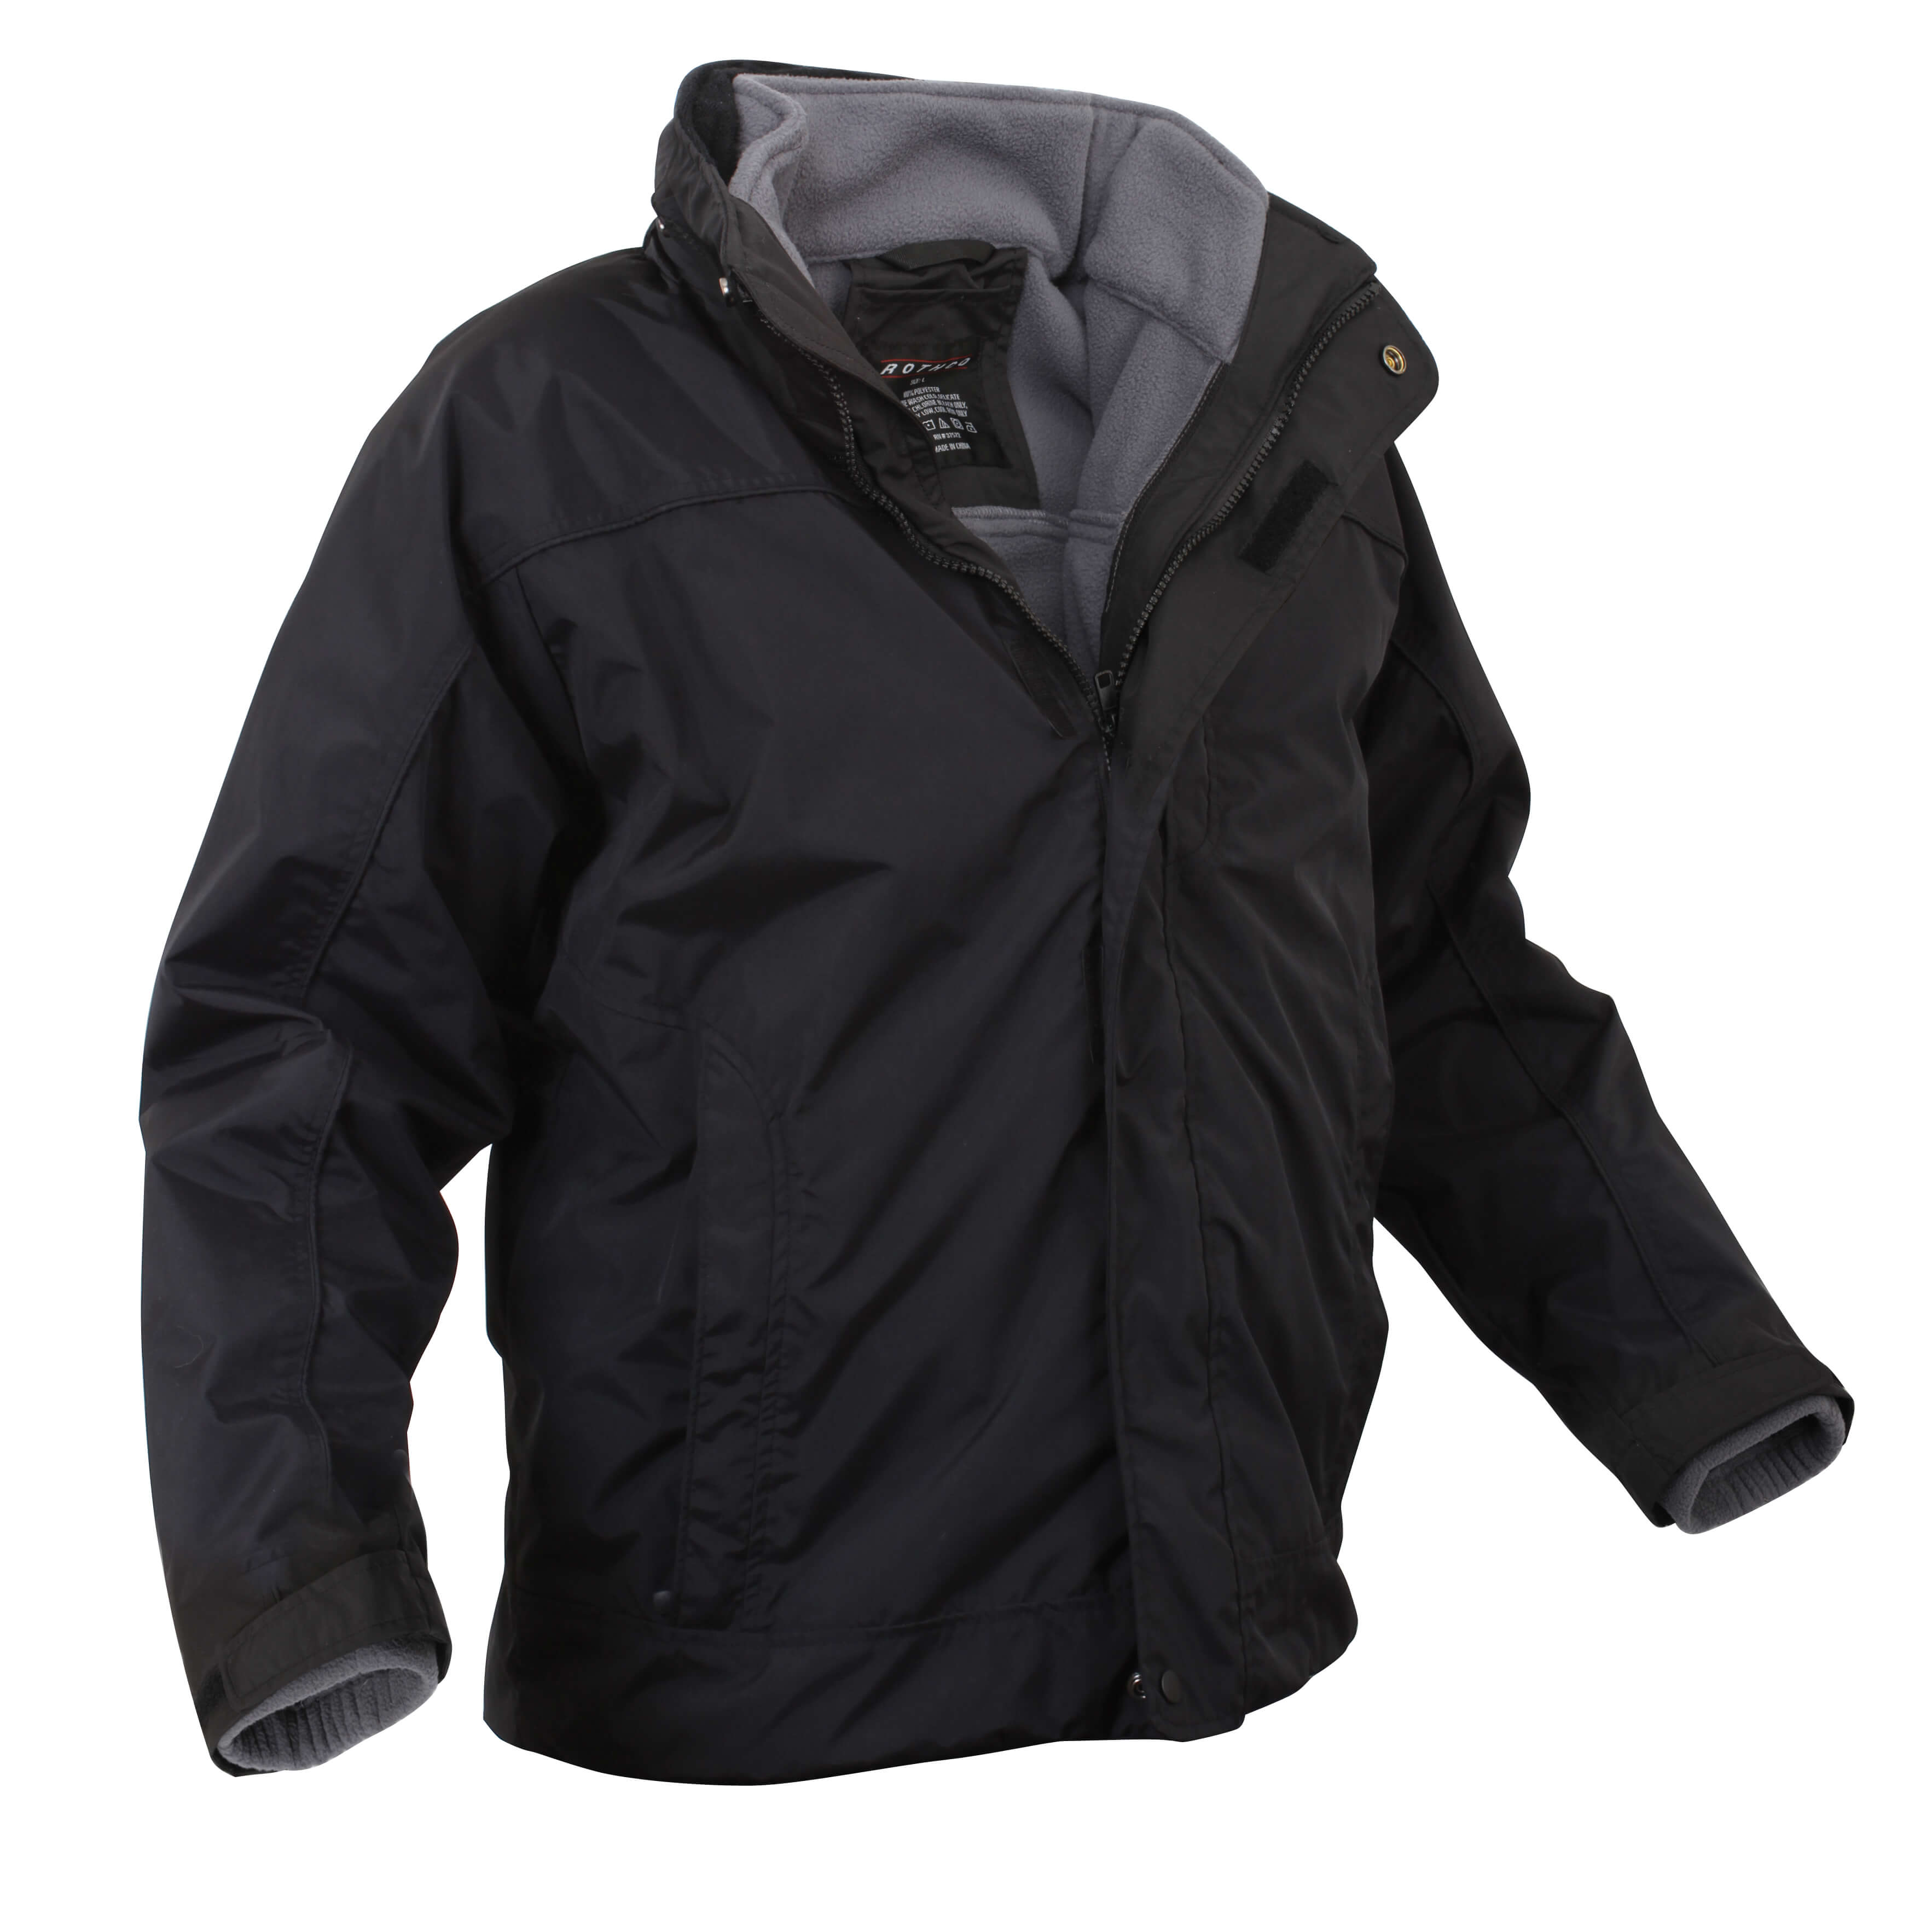 All Weather 3-in-1 Jacket